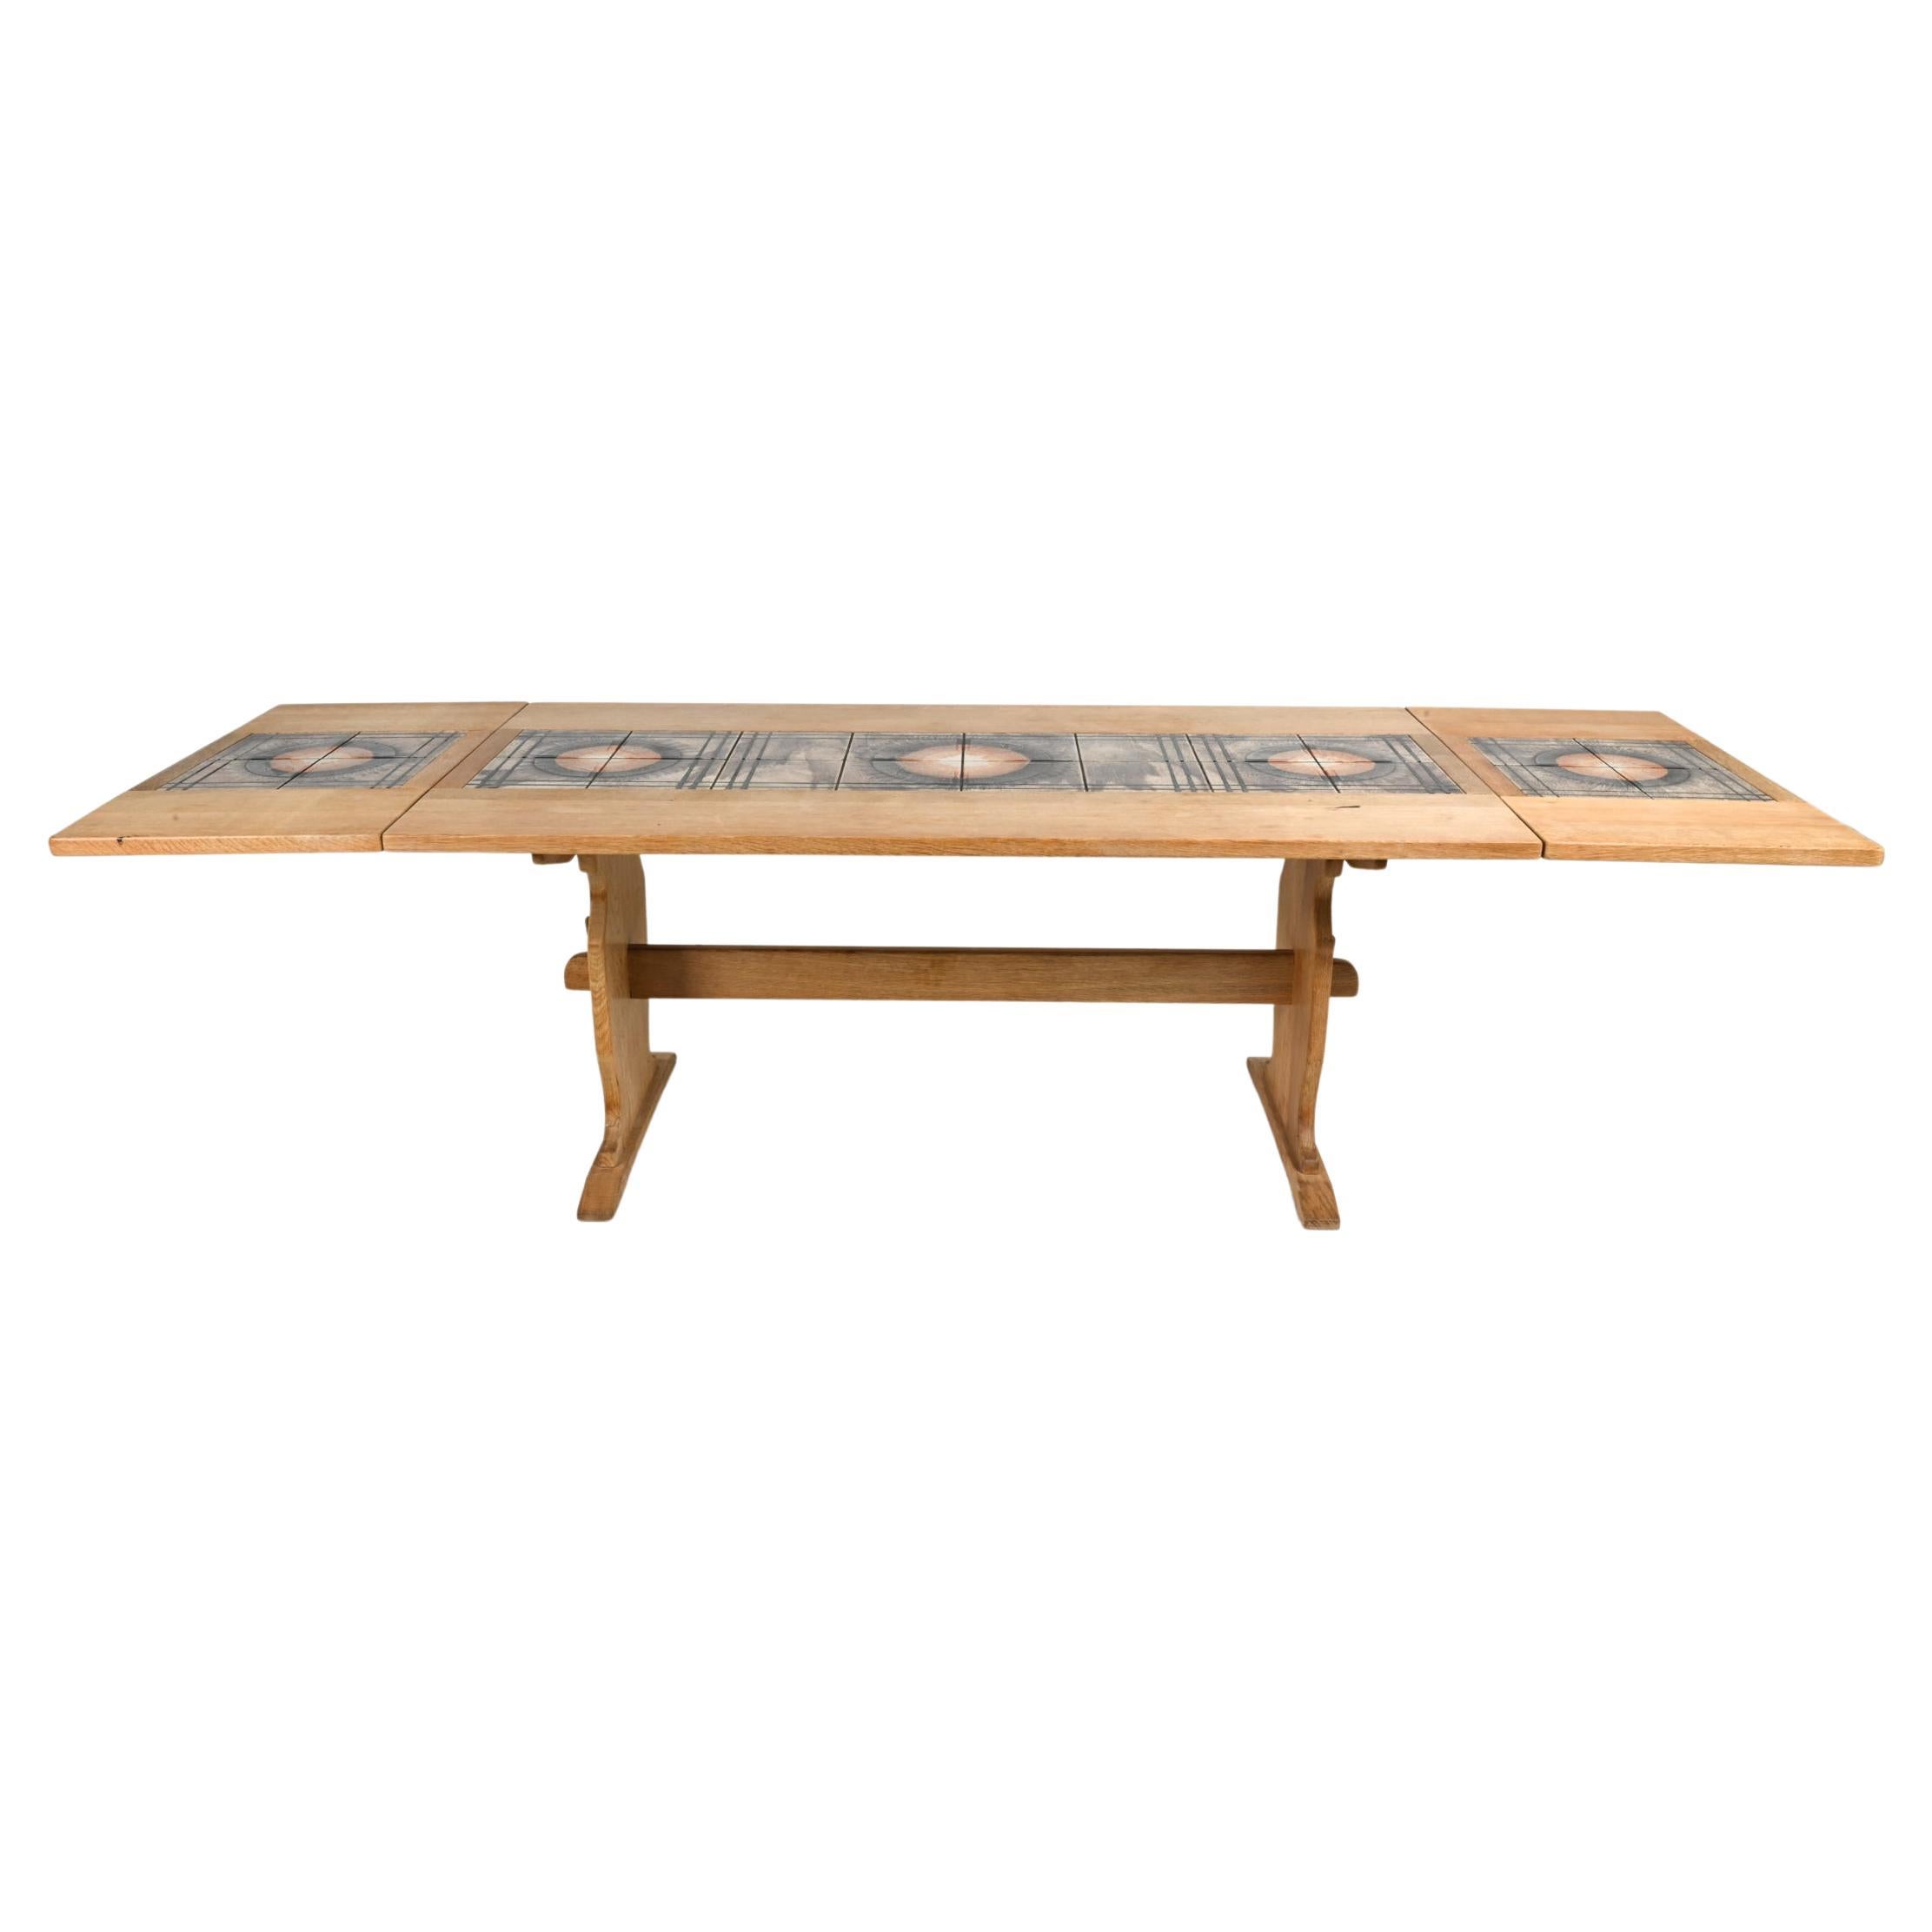 Danish Ox Art Oak & Ceramic Tile Mosaic-Top Dining Table With Leaves, c. 1970's For Sale